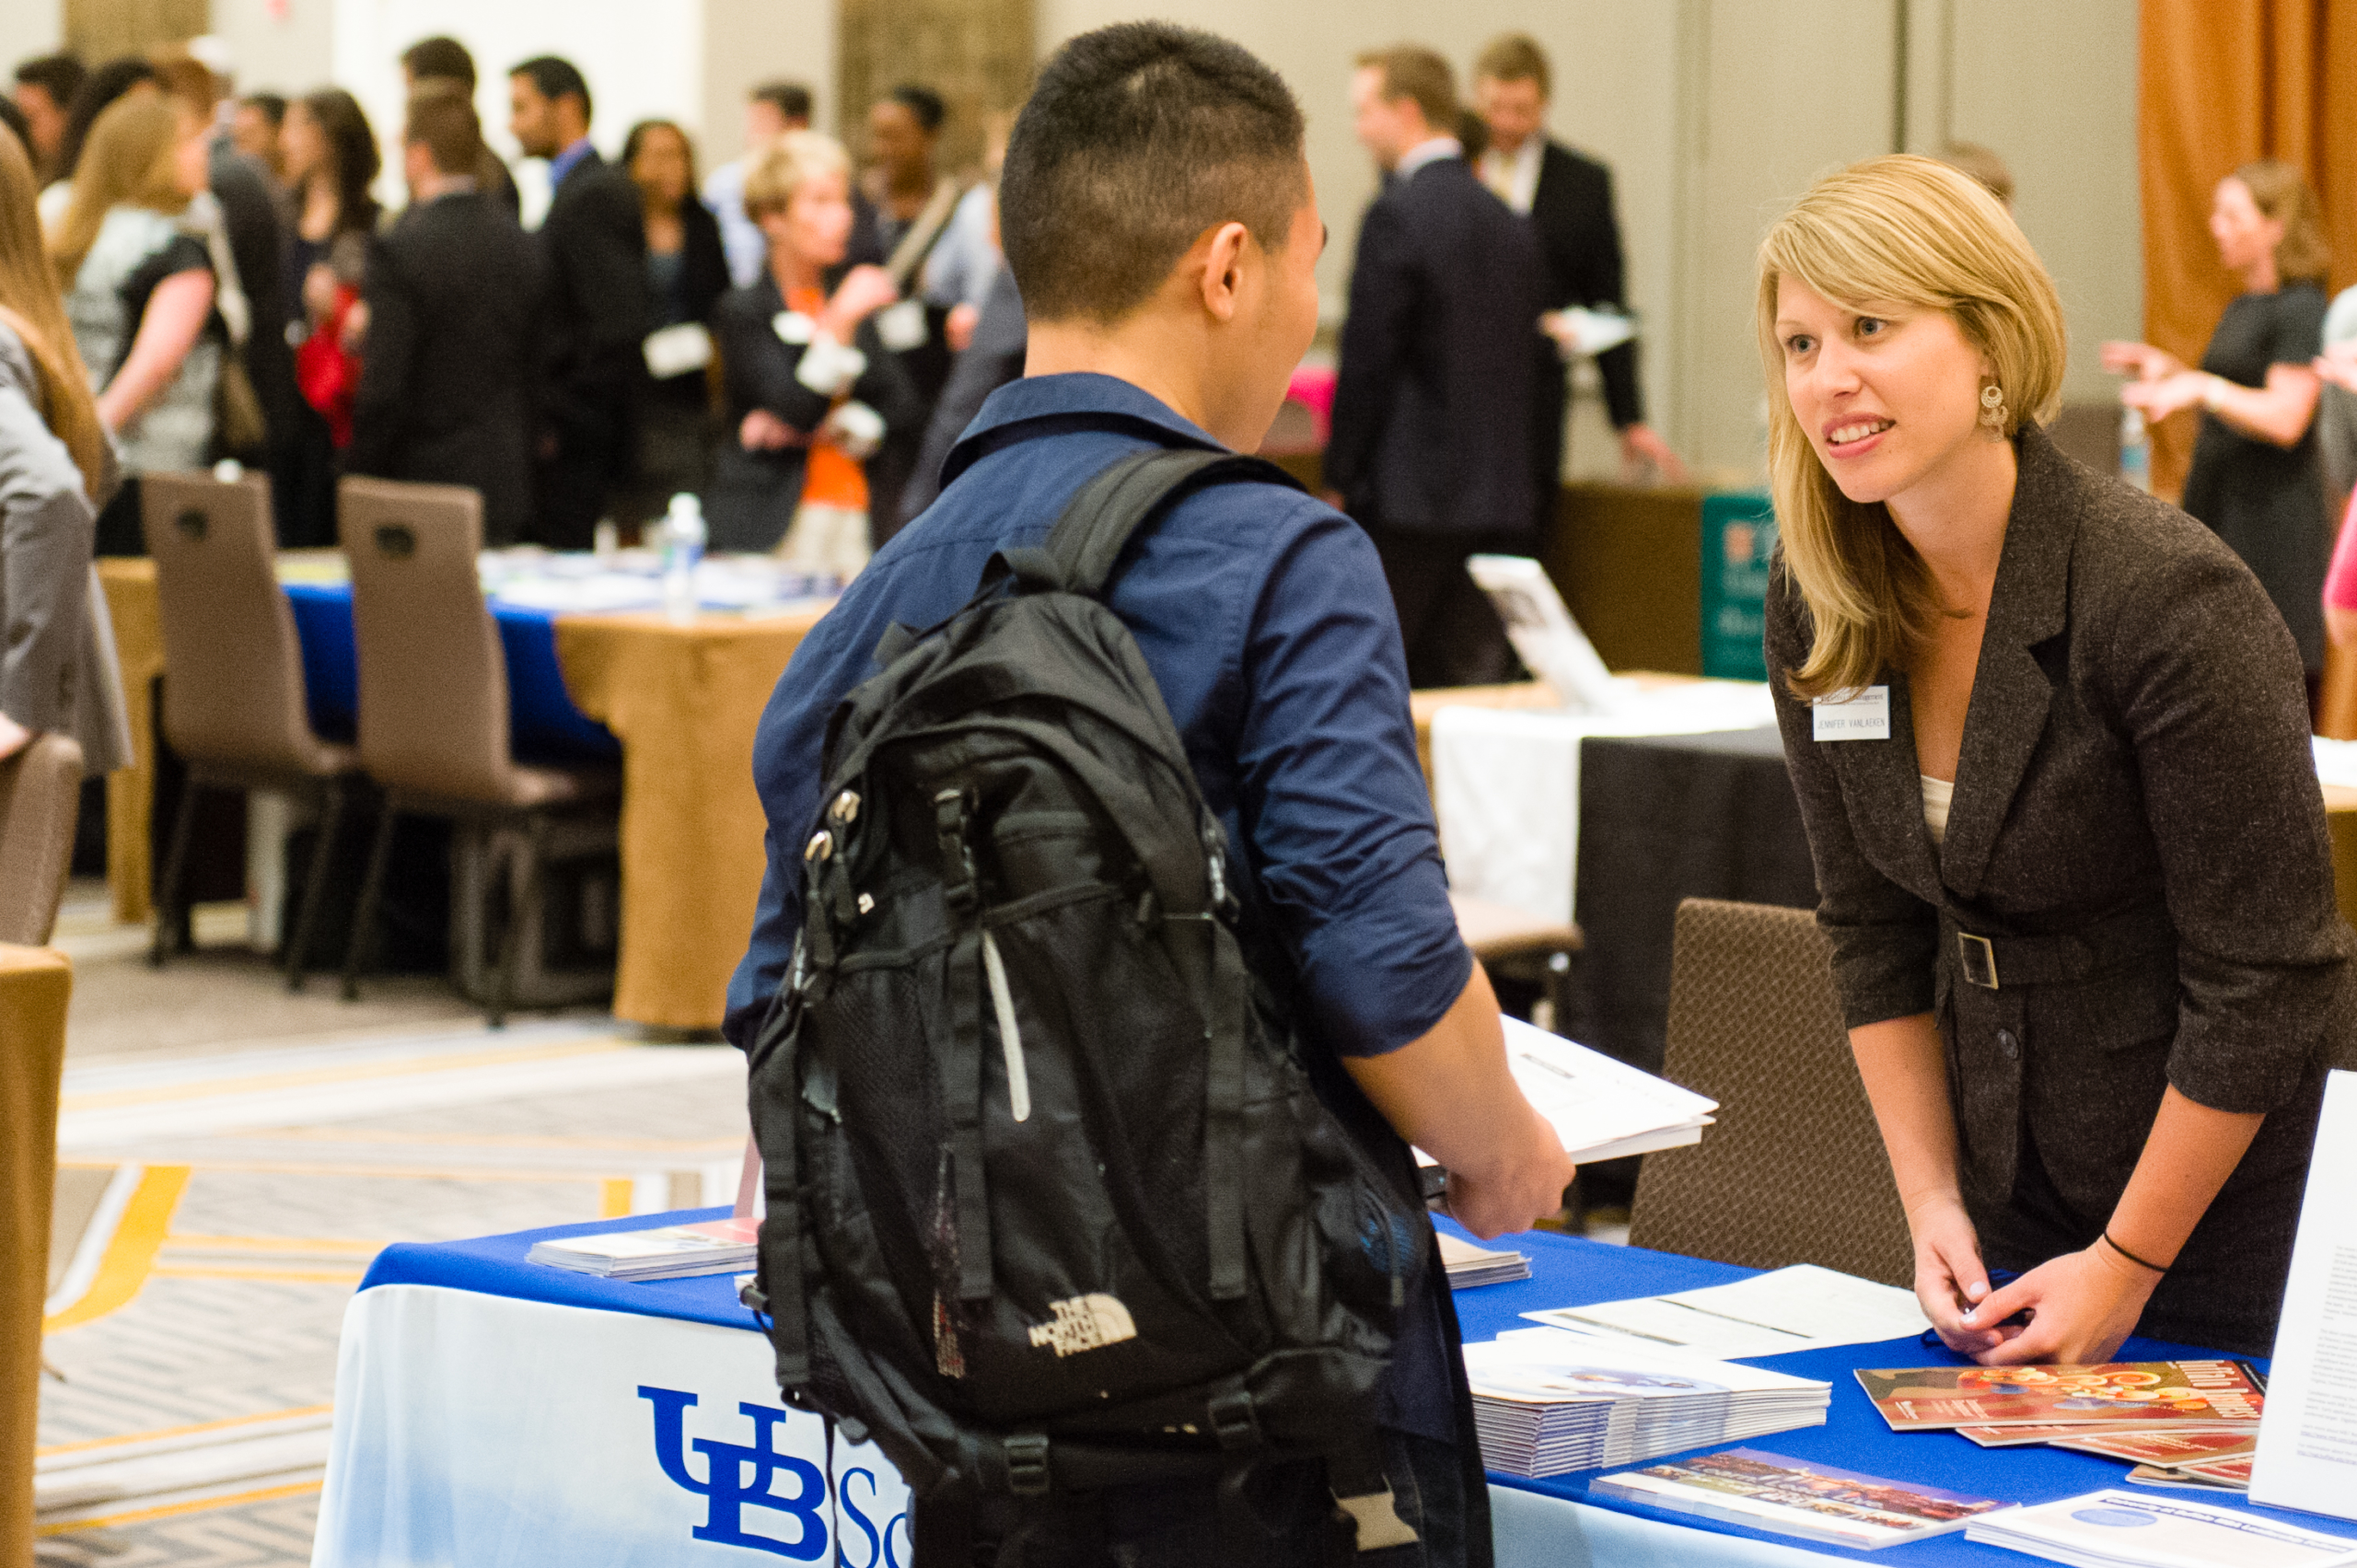 Permalink to: "MBA Tours: Top B-Schools Hit the Road"